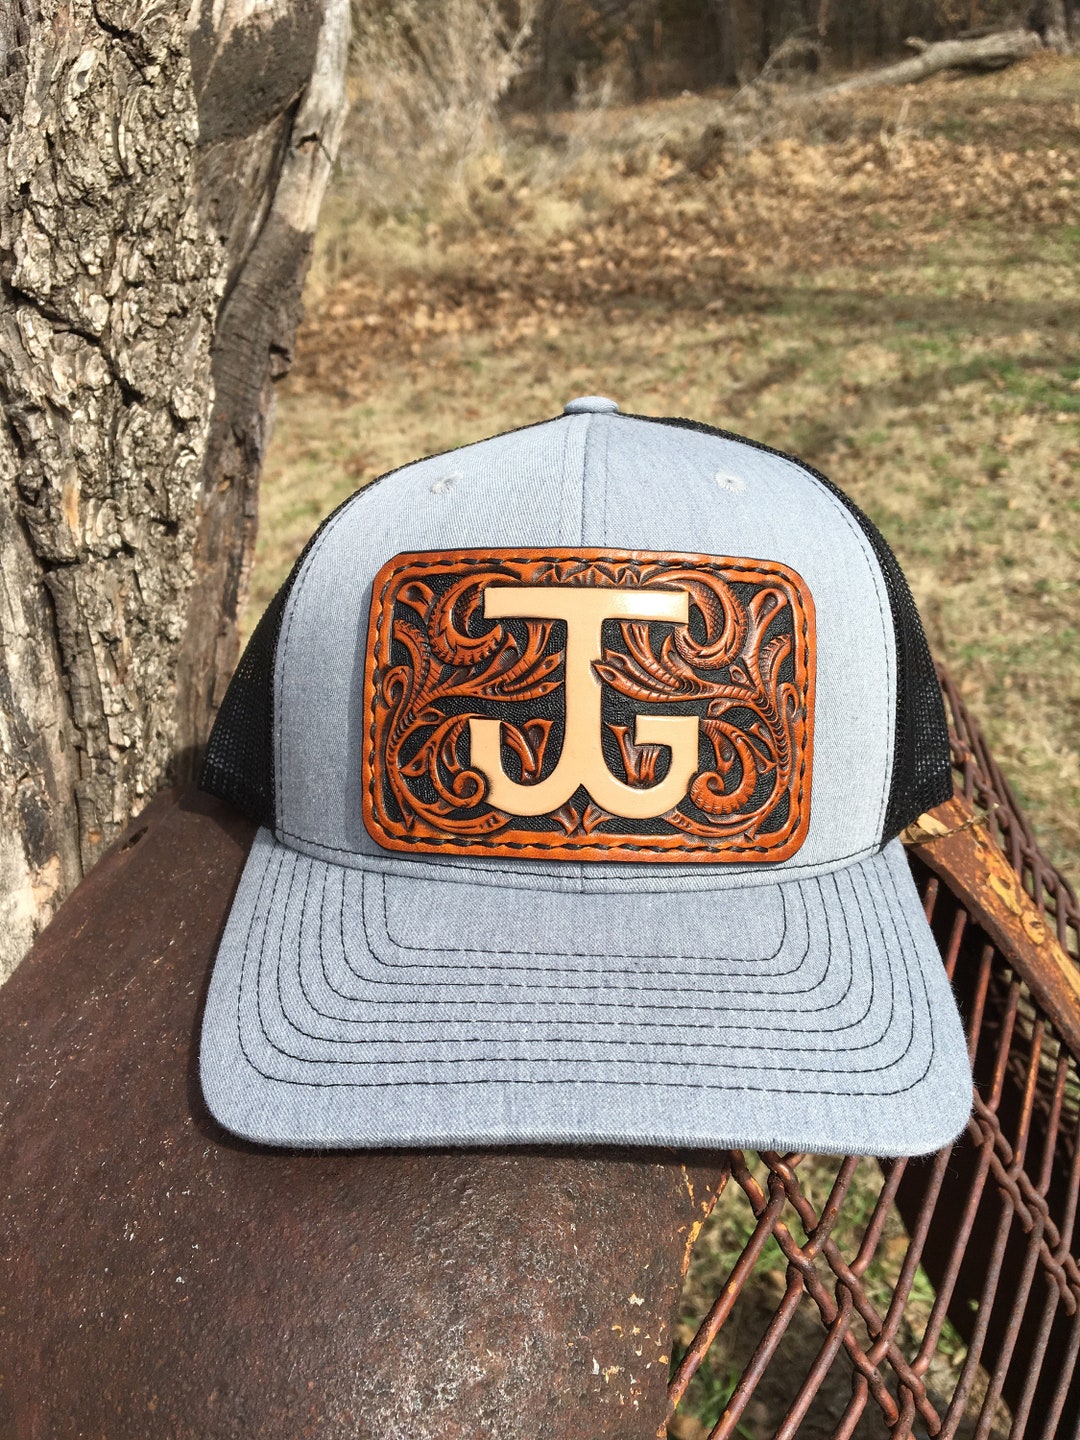 Tooled carved leather patch custom trucker cap hat Gorra